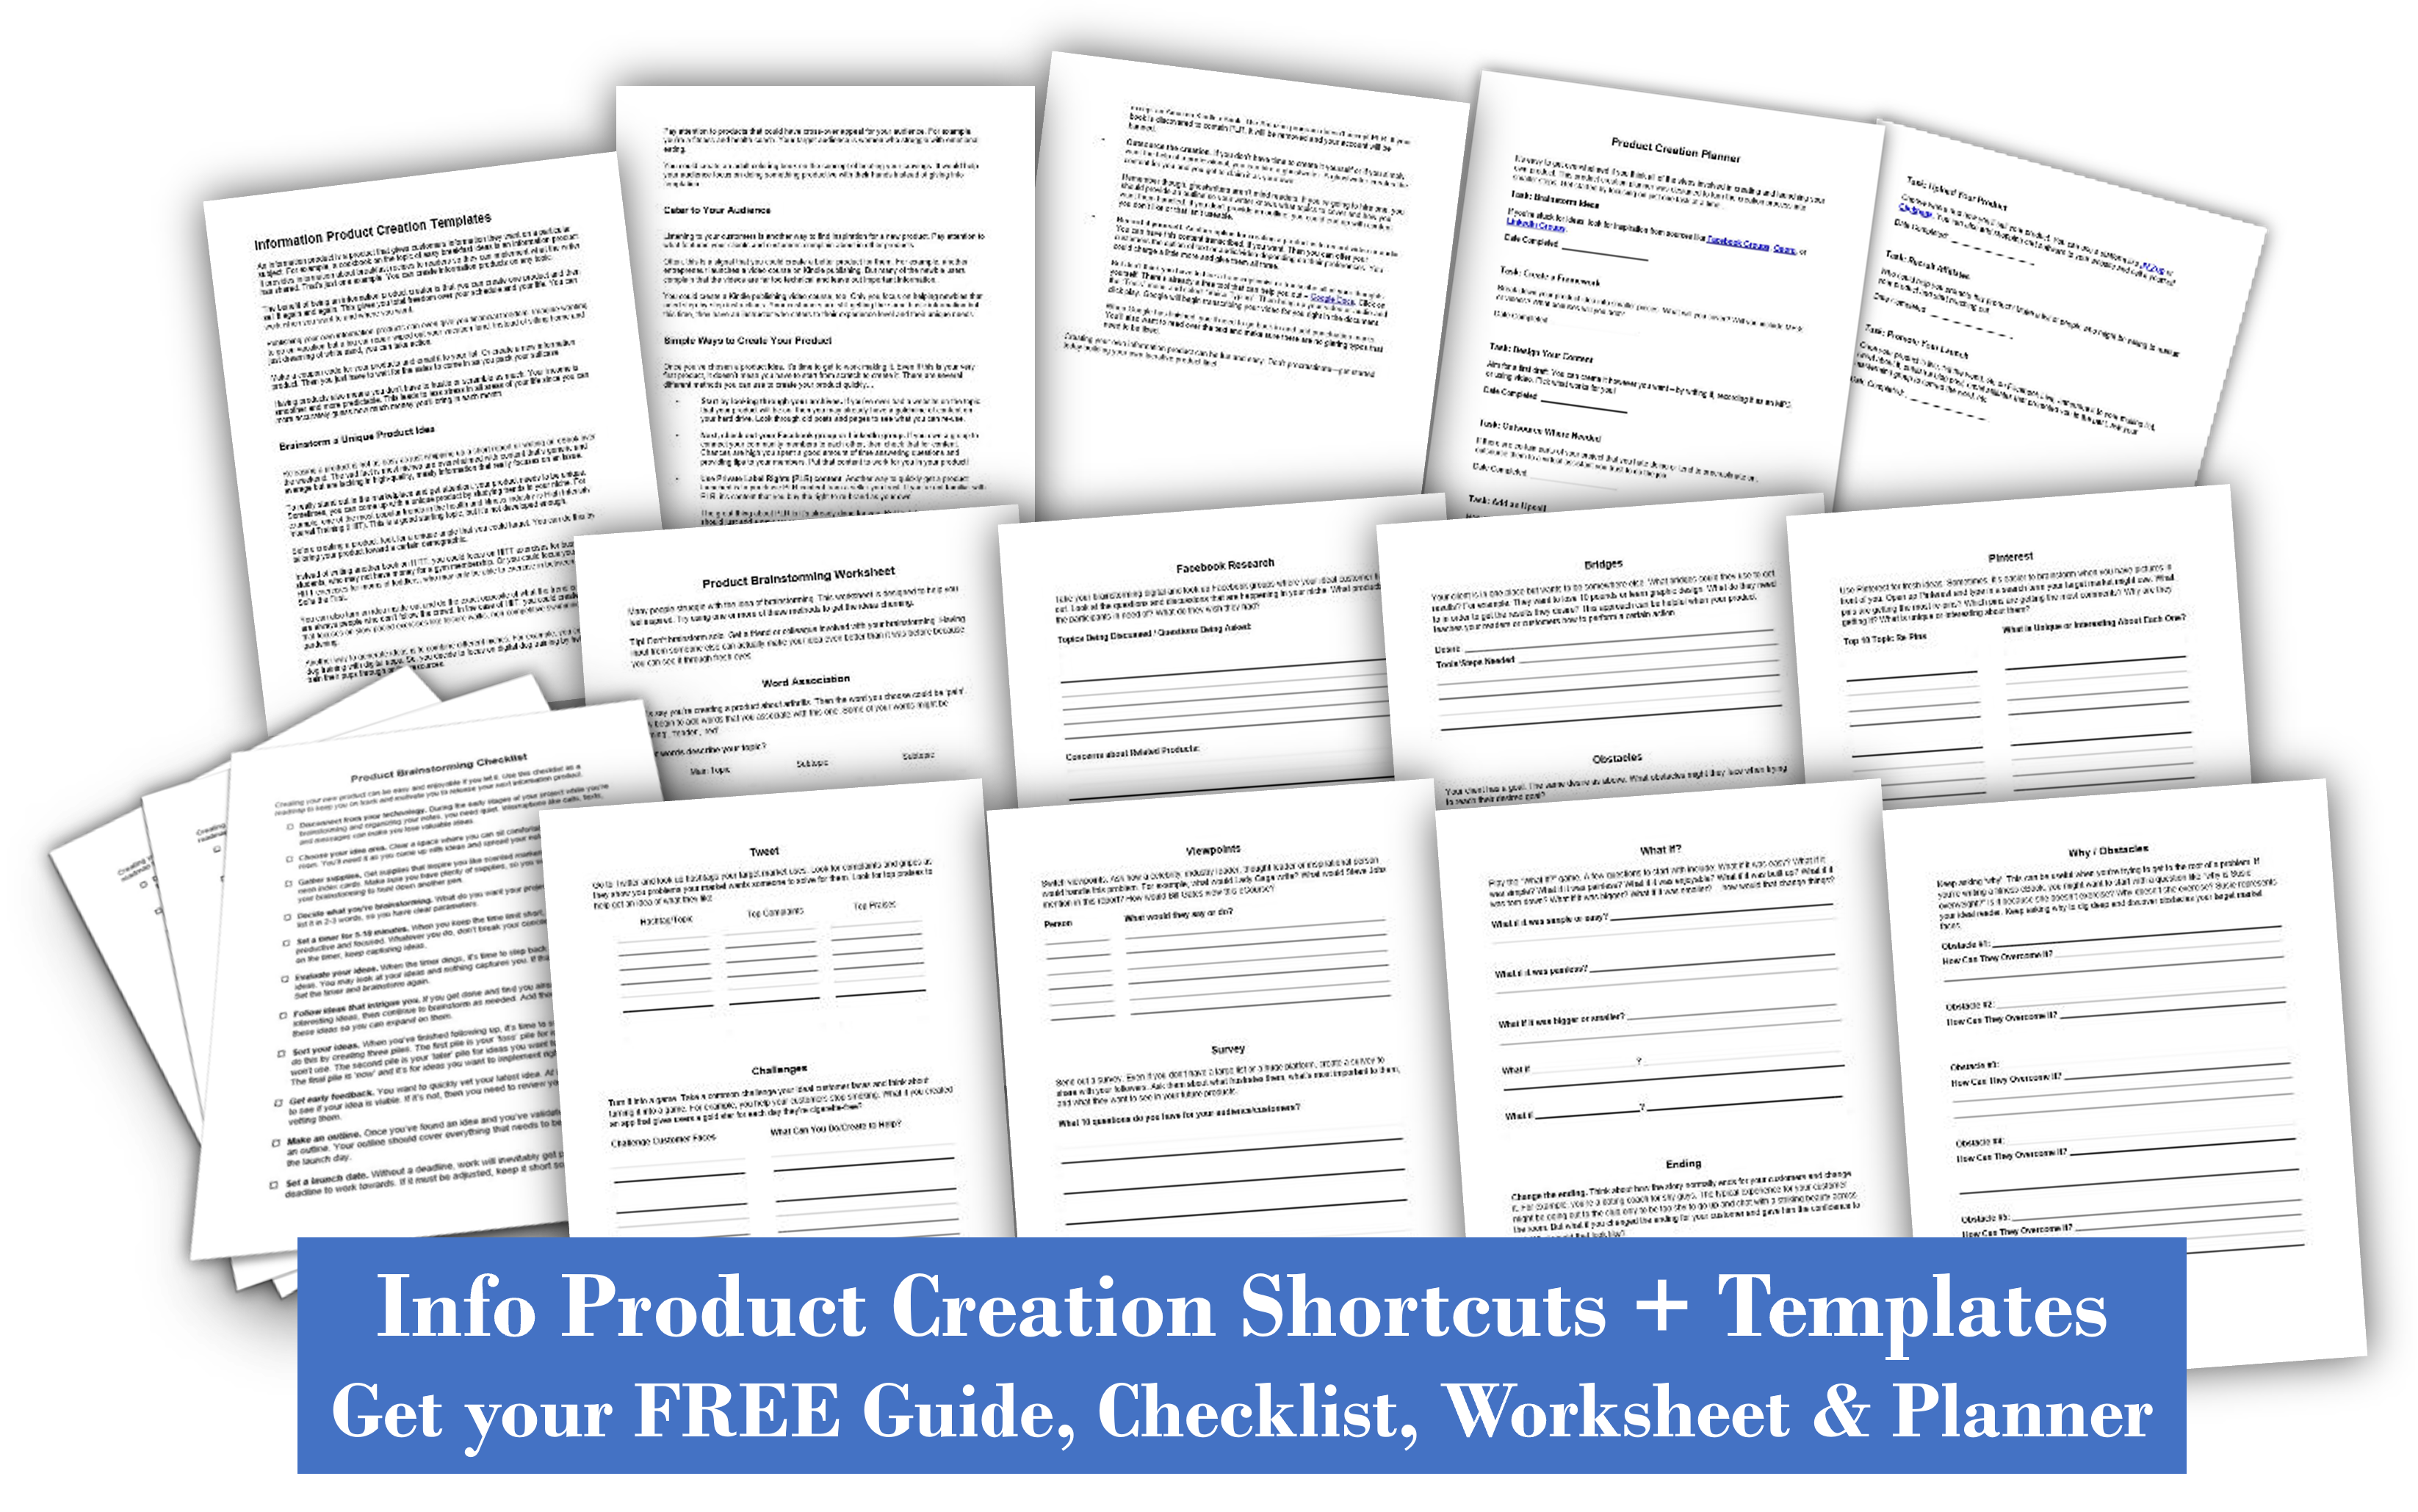 Info Product Creation Shortcuts and Templates